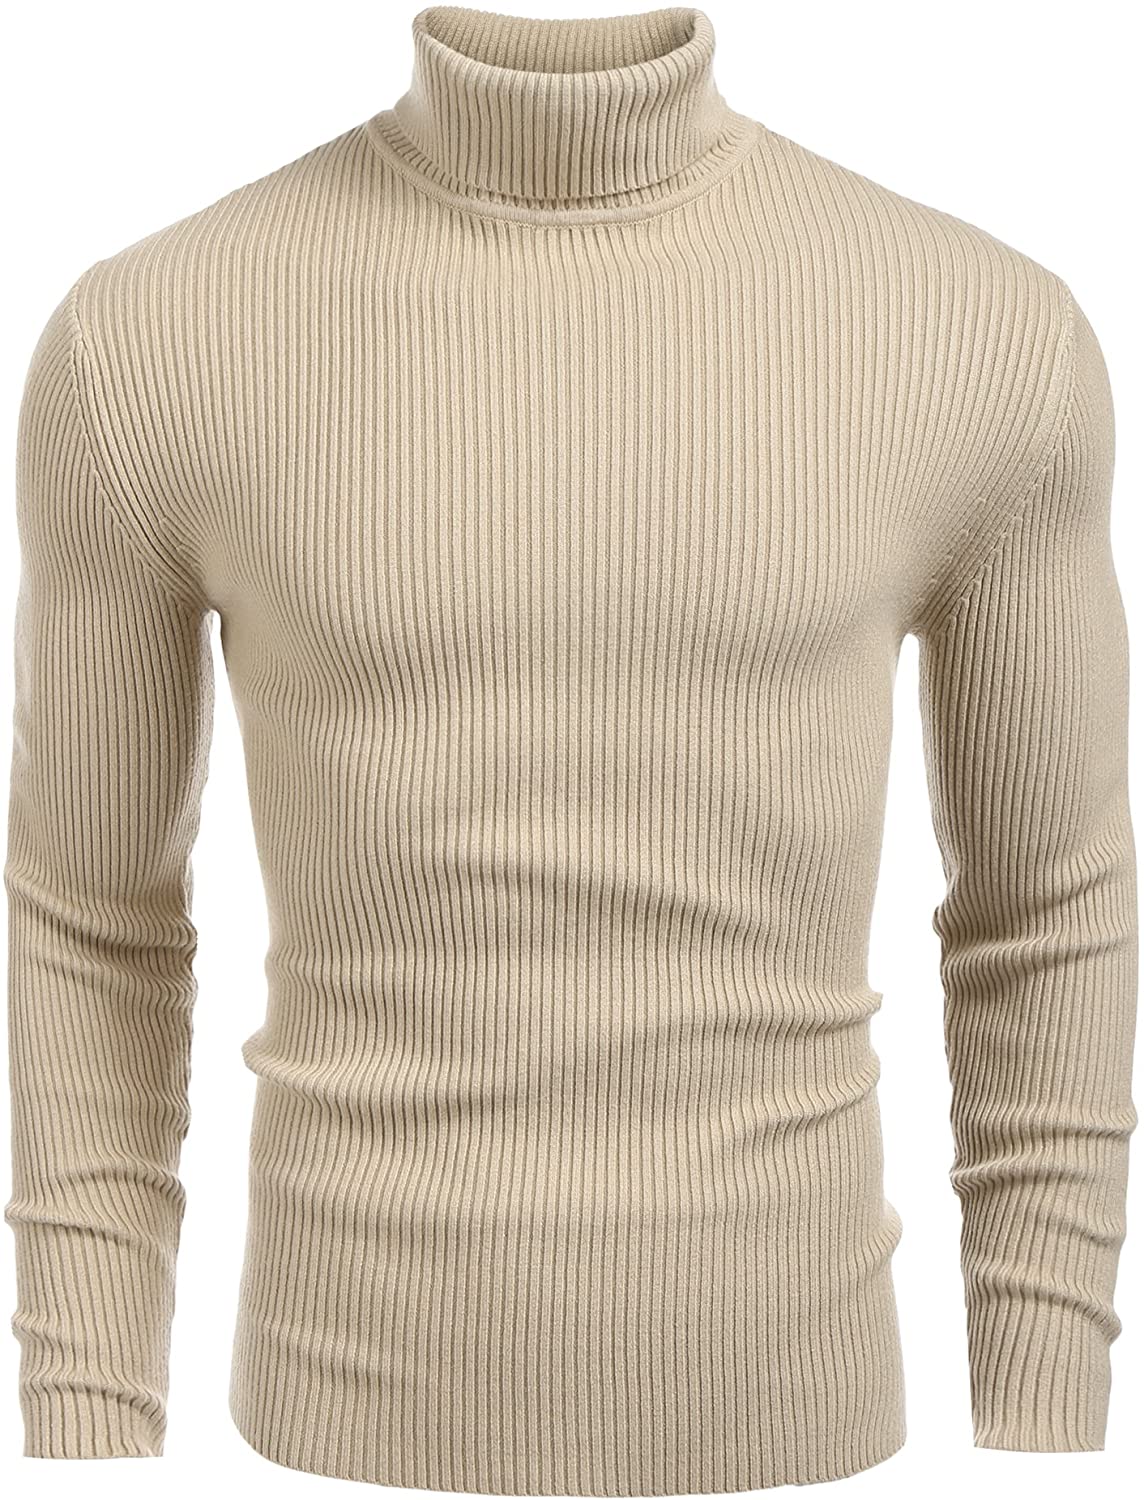 URRU Mens Casual Basic Design Ribbed Slim Fit Long Sleeve Knitted Pullover Turtleneck Thermal Sweater 